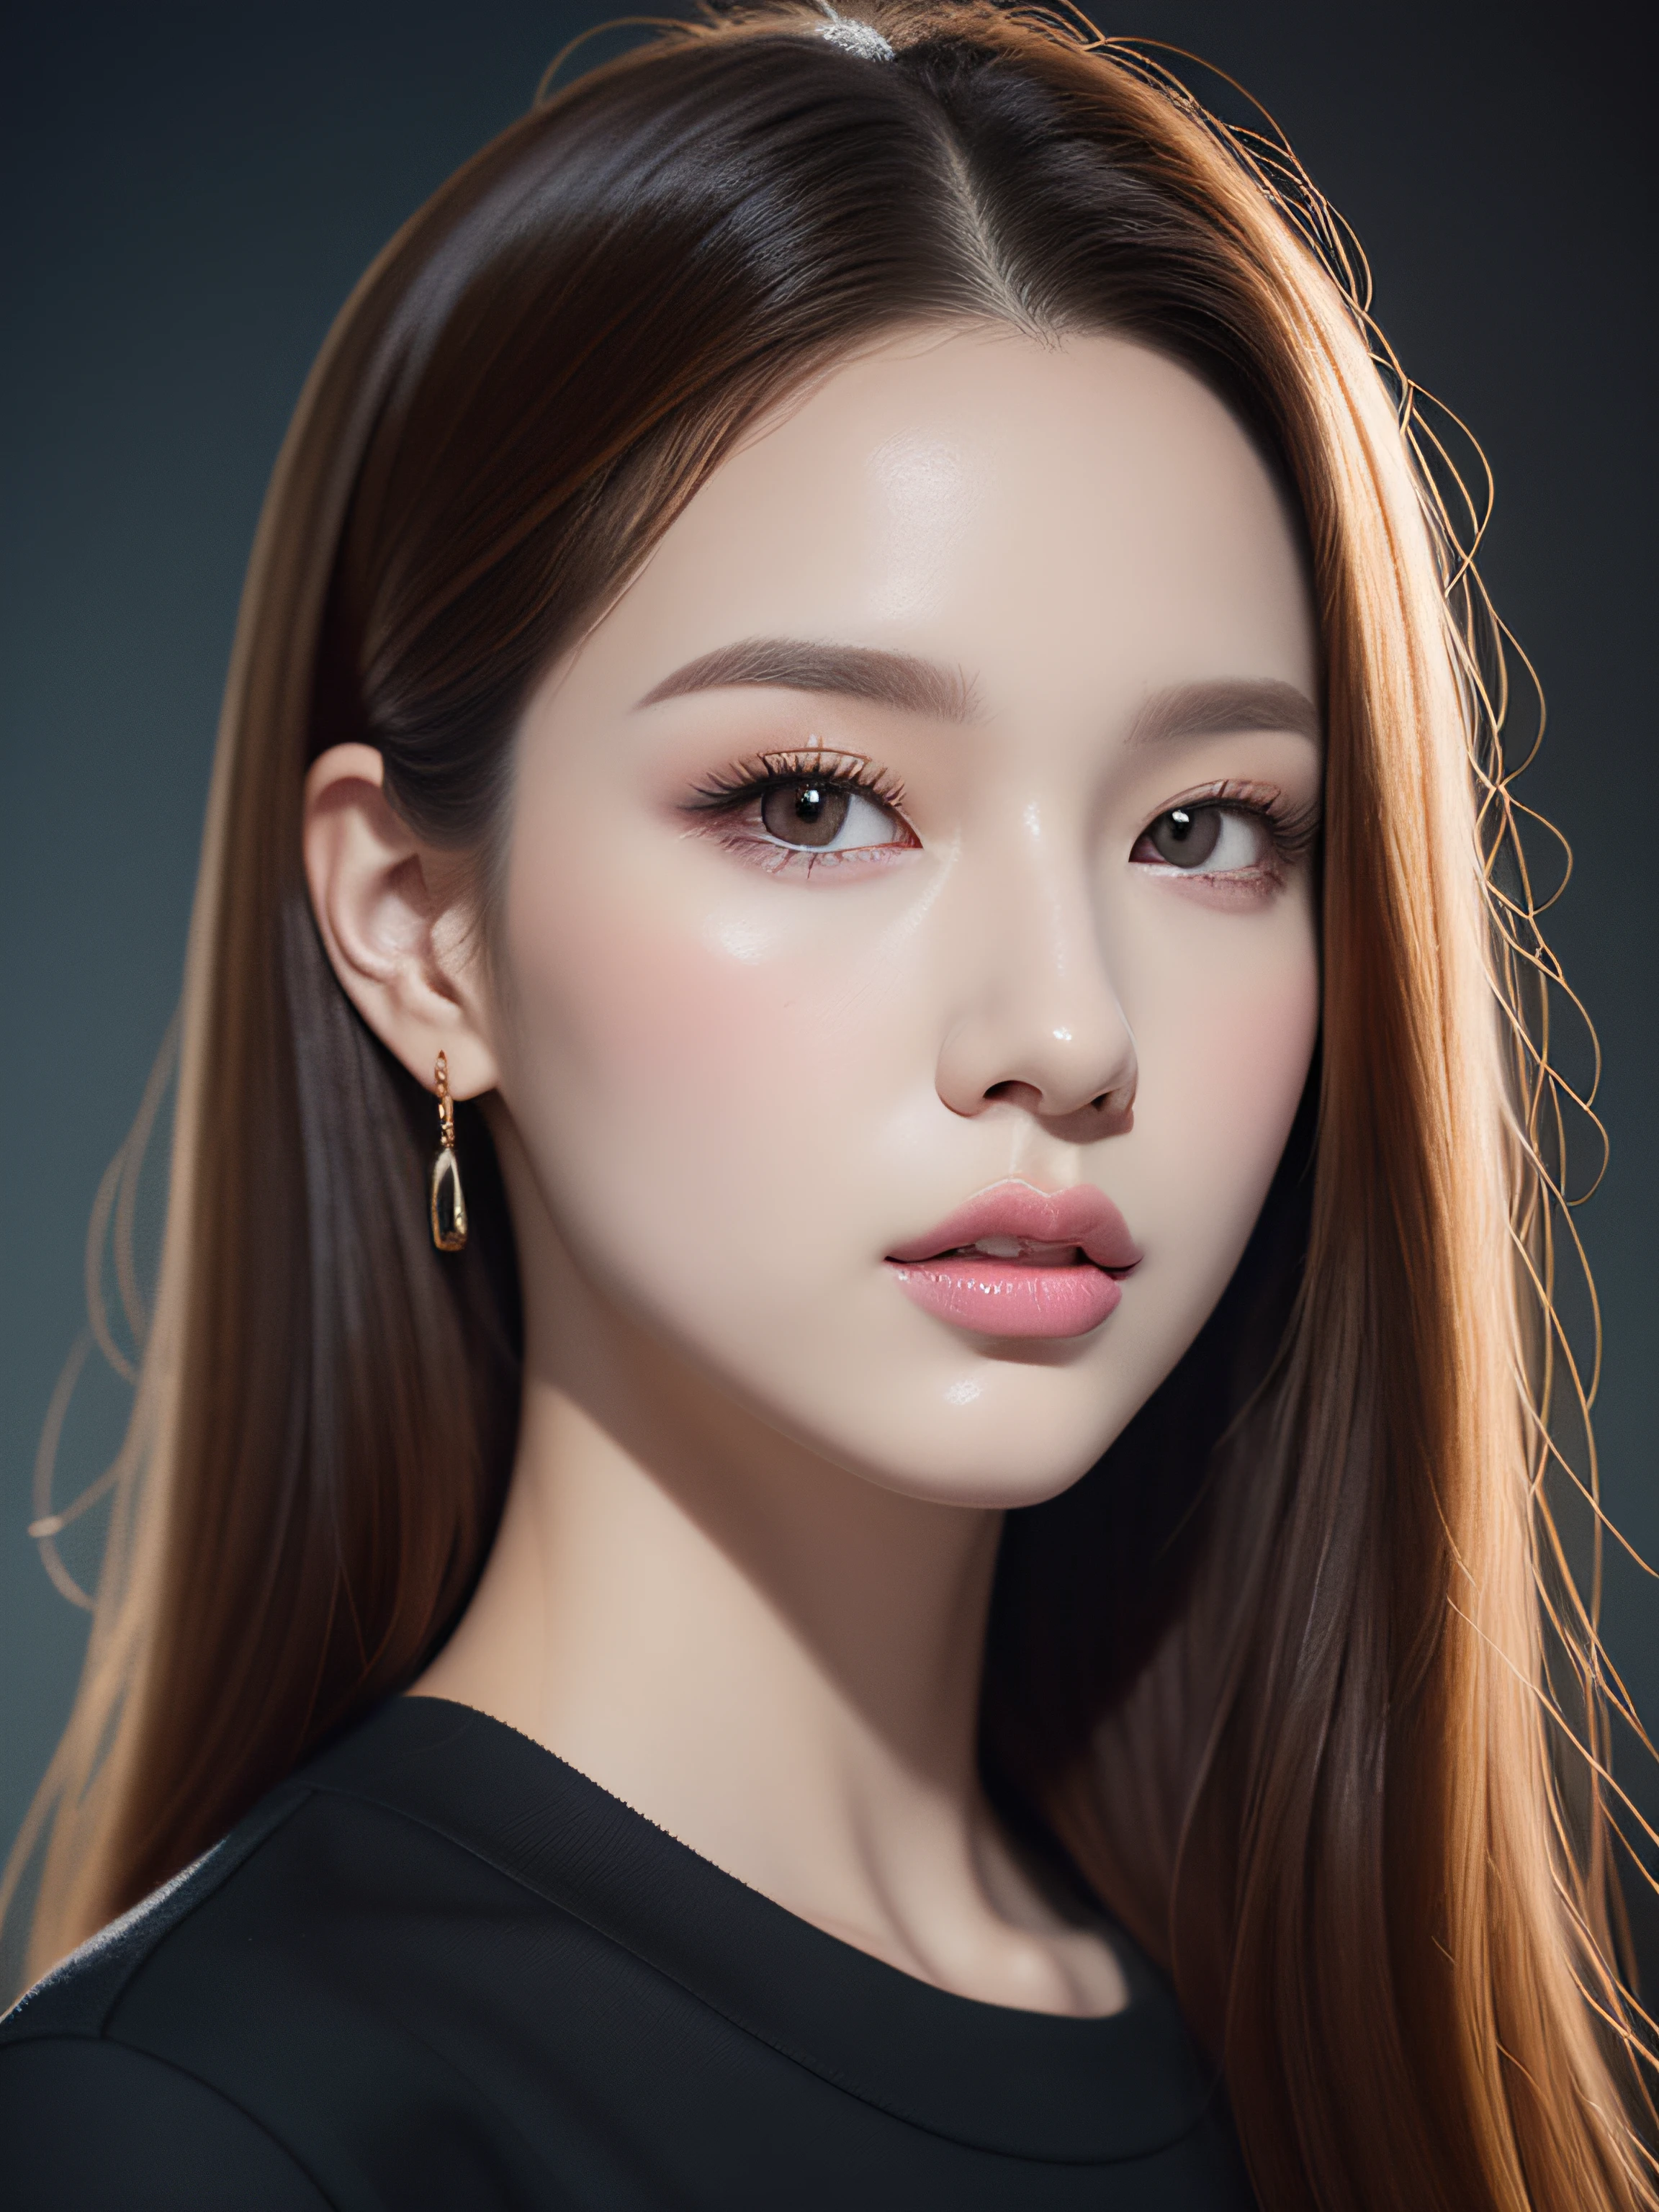 Portrait of a woman with long hair and a black shirt, digital illustration portrait, in the art style of bowater, portrait of jossi of blackpink, digitalportrait, Digital Art Portrait, realism artstyle, high quality portrait, 🤤 girl portrait, realistic art style, # 1 digital painting of all time, #1 digital painting of all time, glossy digital painting